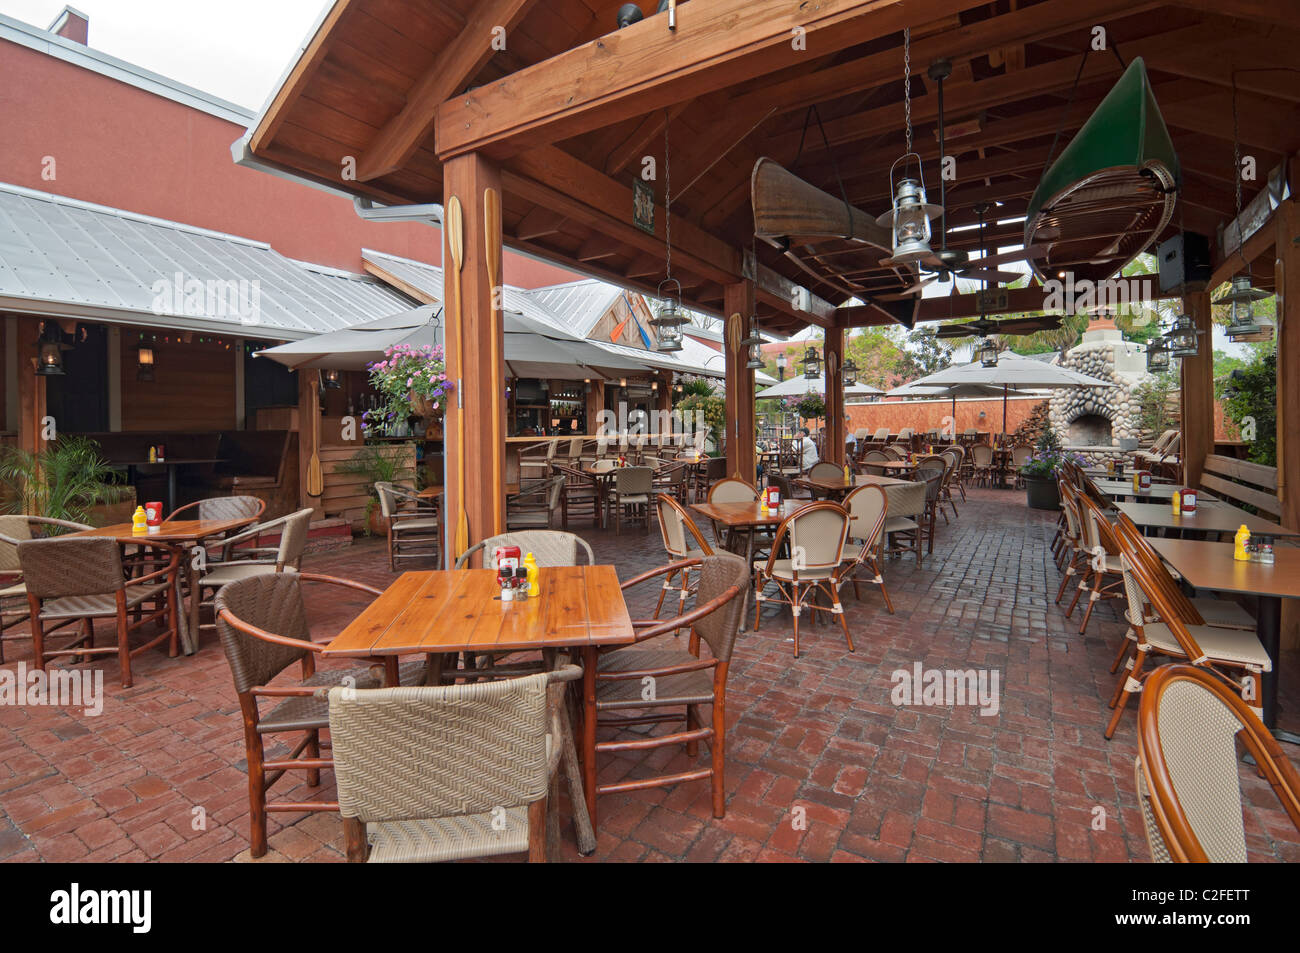 The Great Outdoors Restaurant outdoor patio area in High Springs Florida Stock Photo